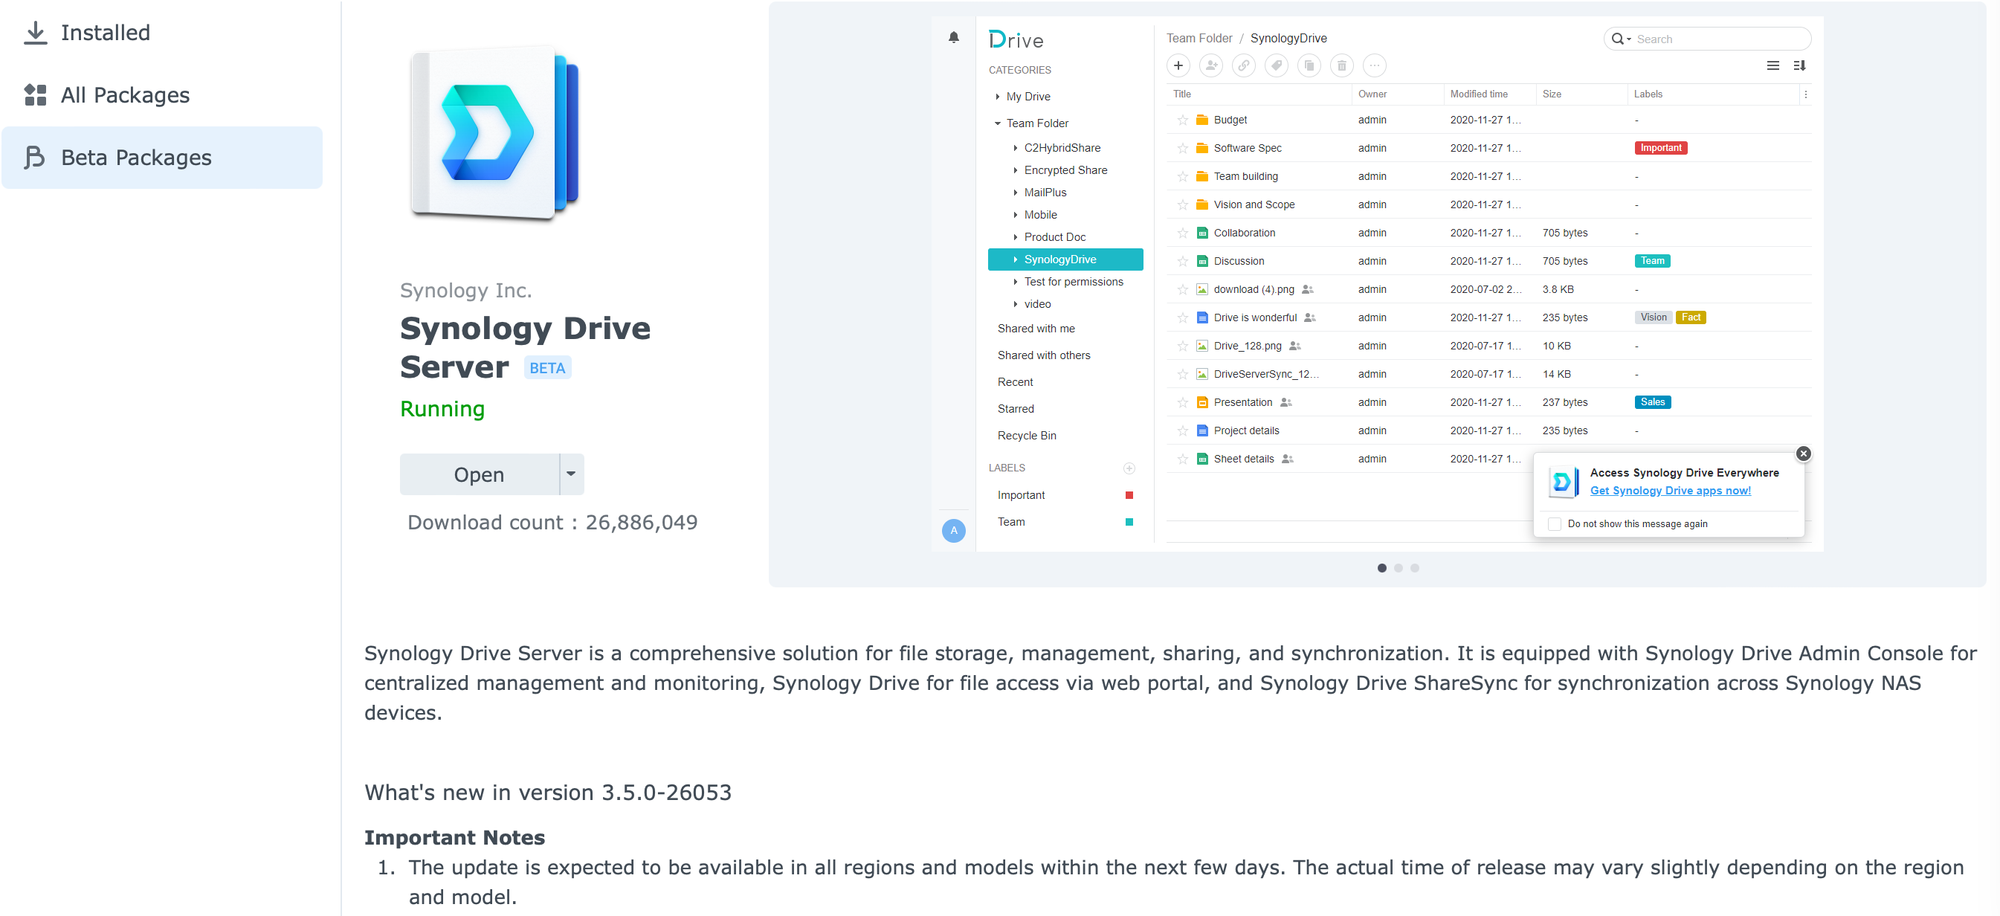 Synology Drive 3.5 new upcoming features